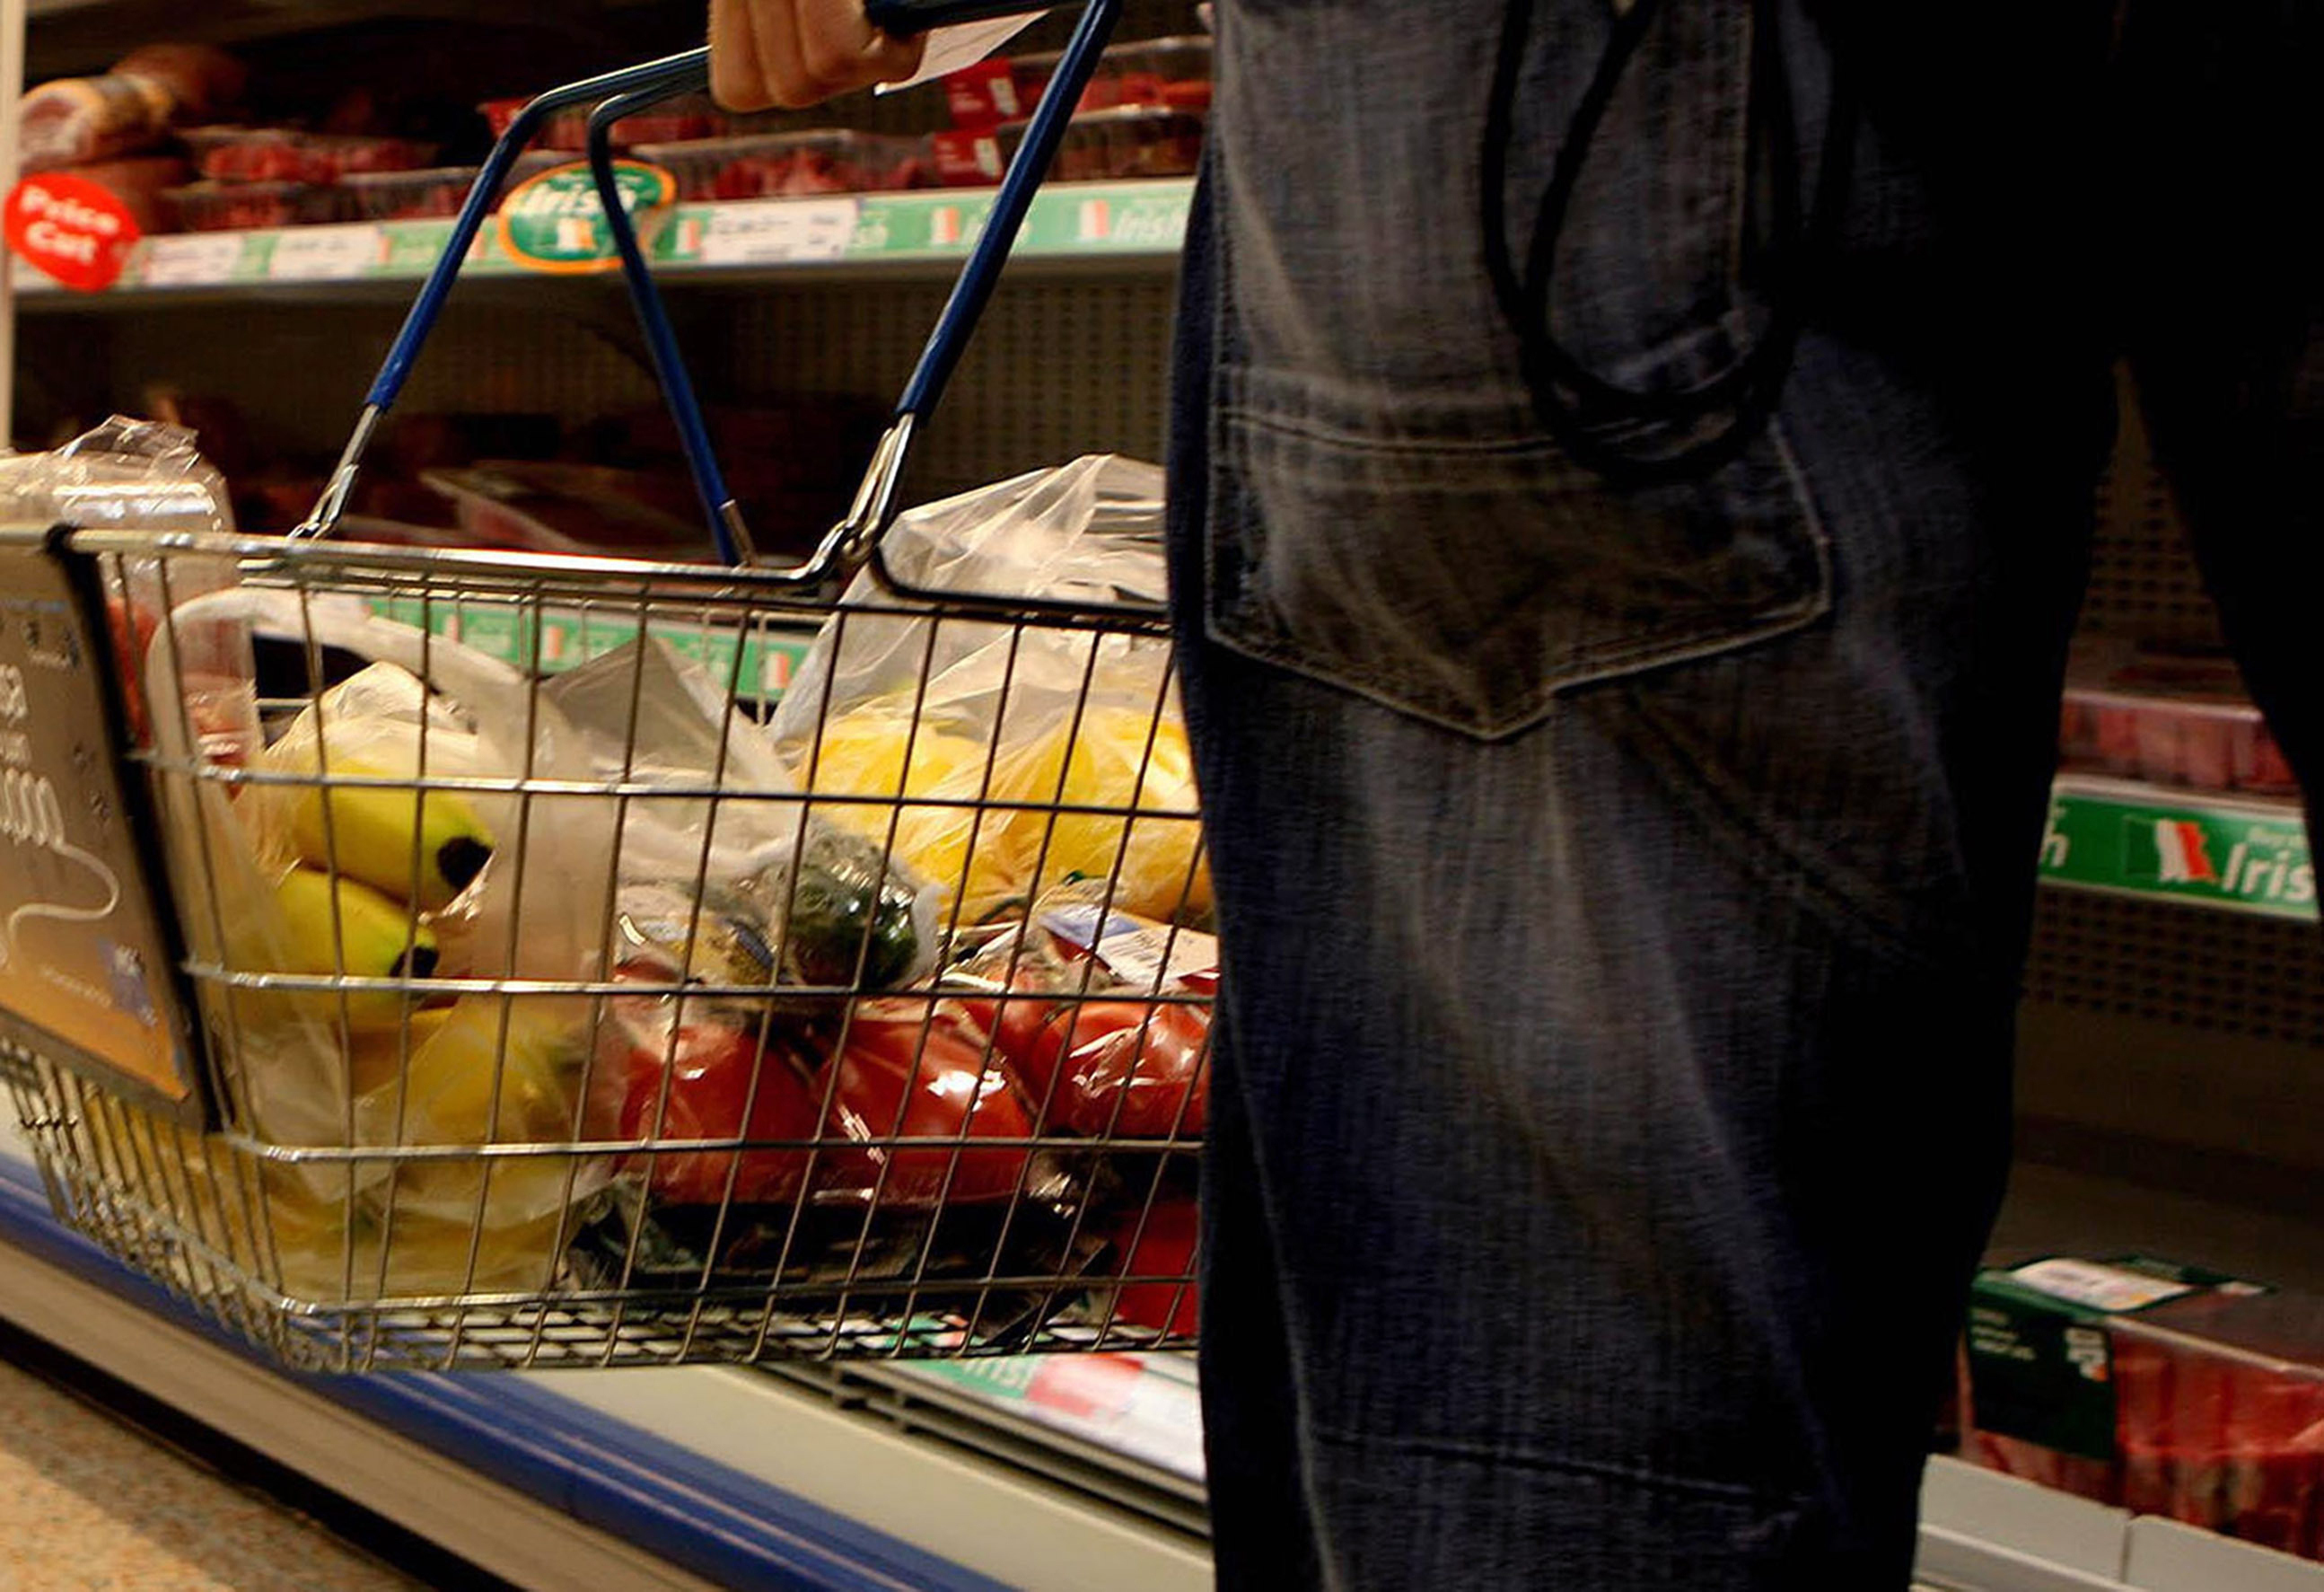 The average cost of grocery trips for at least 20 items ranges from £31.28 in bargain stores such as Poundland to £58.85 in Waitrose (Julien Behal/PA Wire)